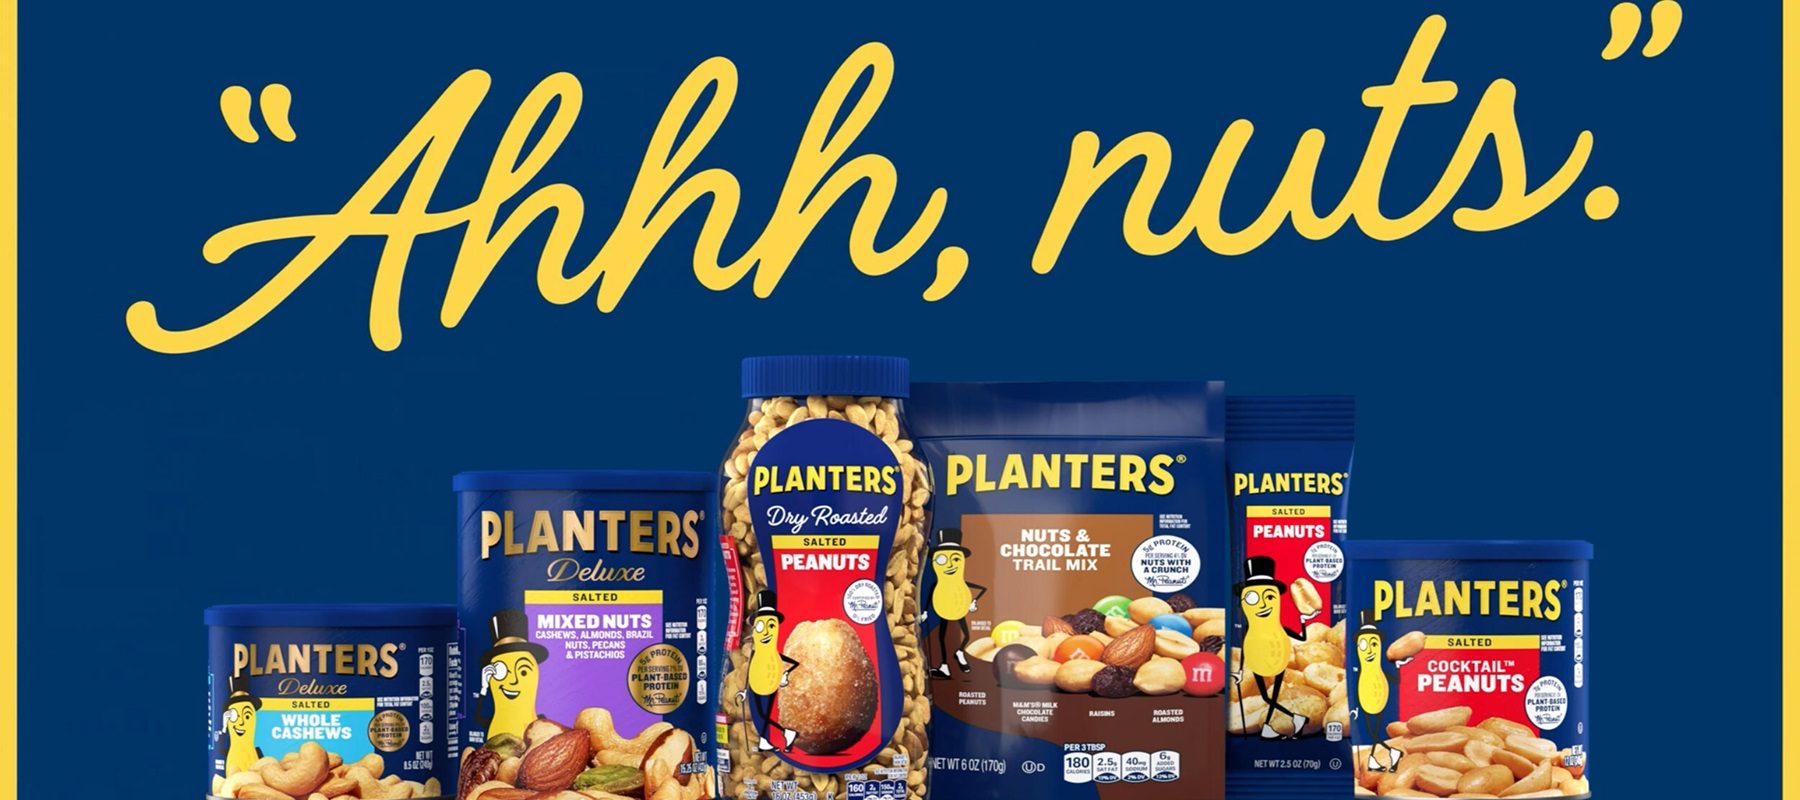 Planters nuts and snacks manufacturer launches “Ahhh, nuts” ad campaign